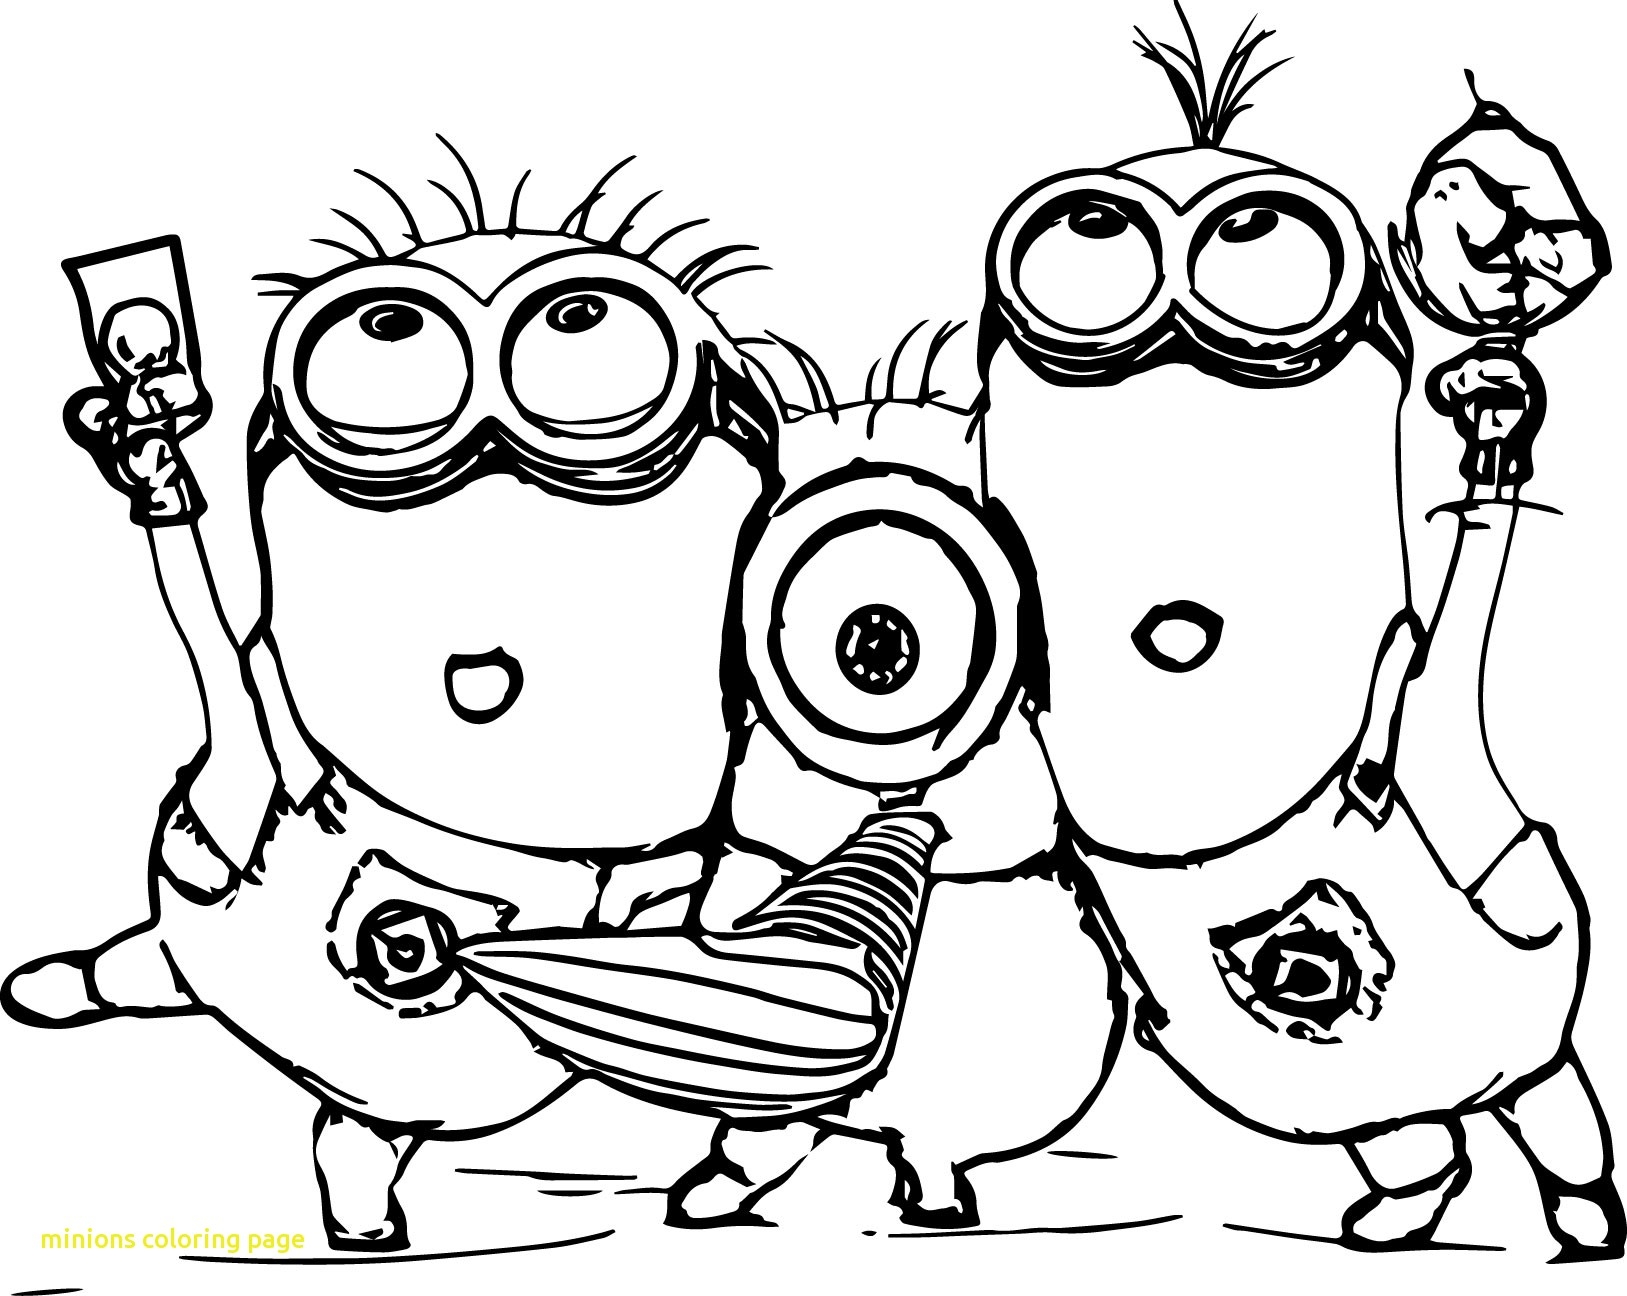 Minion Kevin Coloring Pages At Getcolorings.com | Free Printable